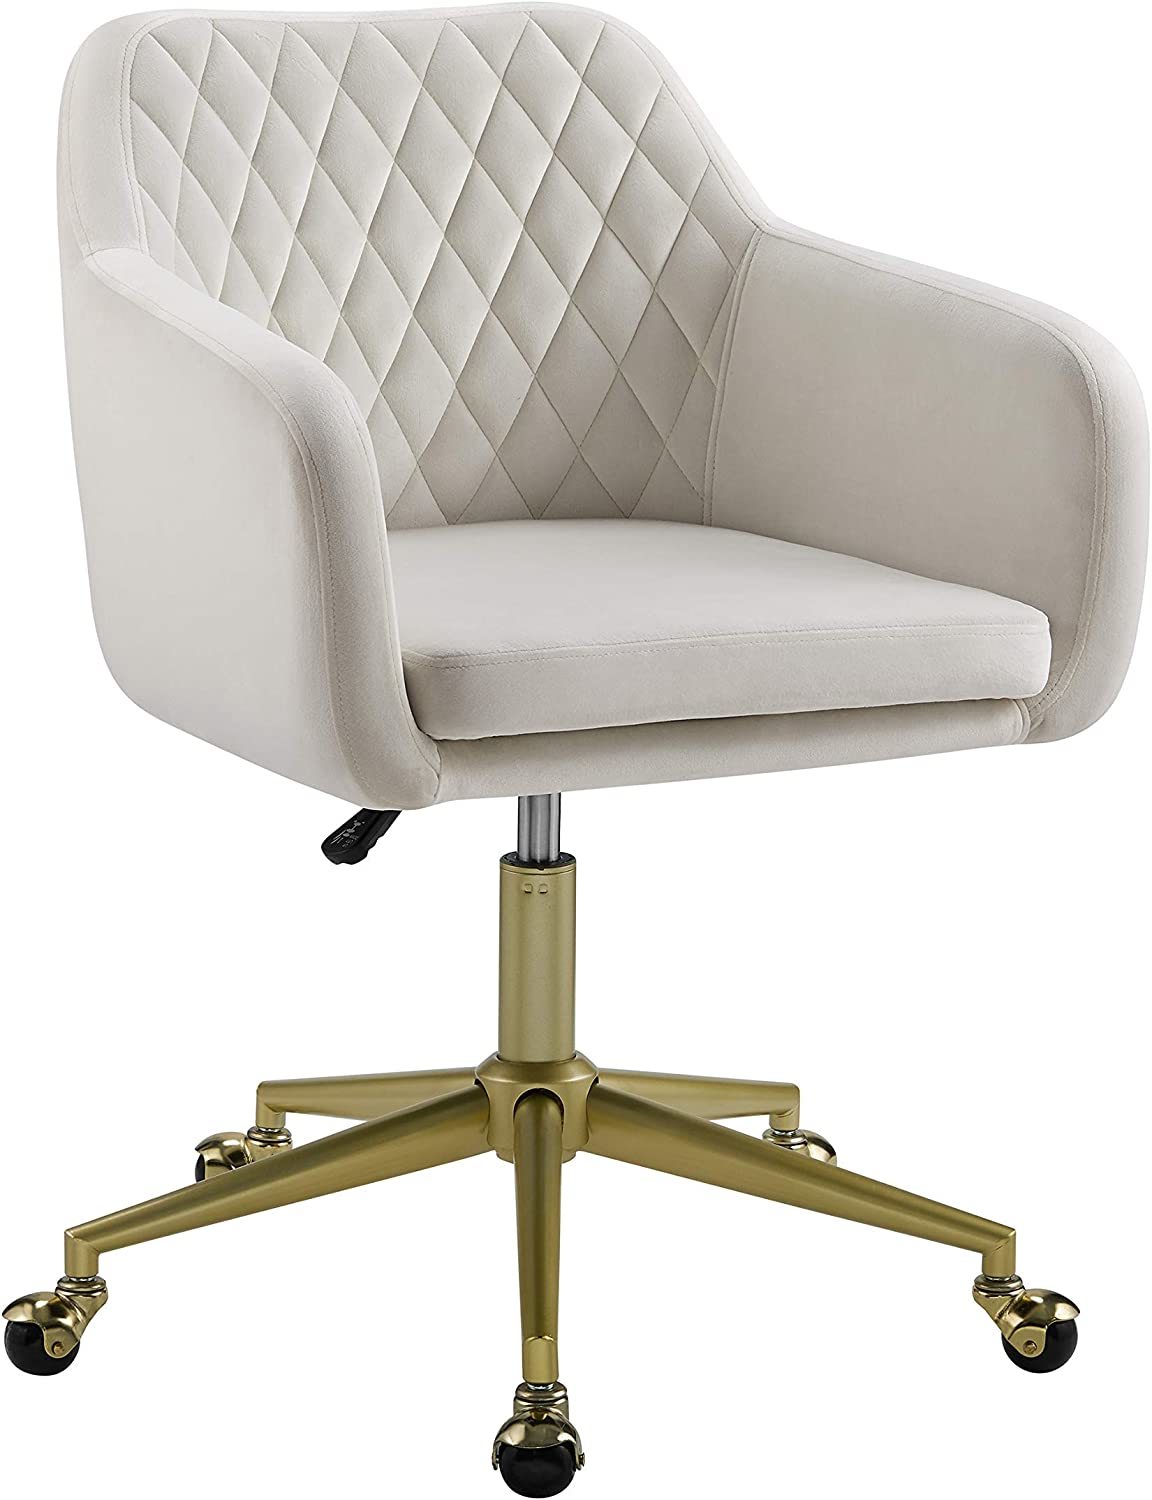 Brooklyn Office Chair In White With Quilting By Linon. - $202.95